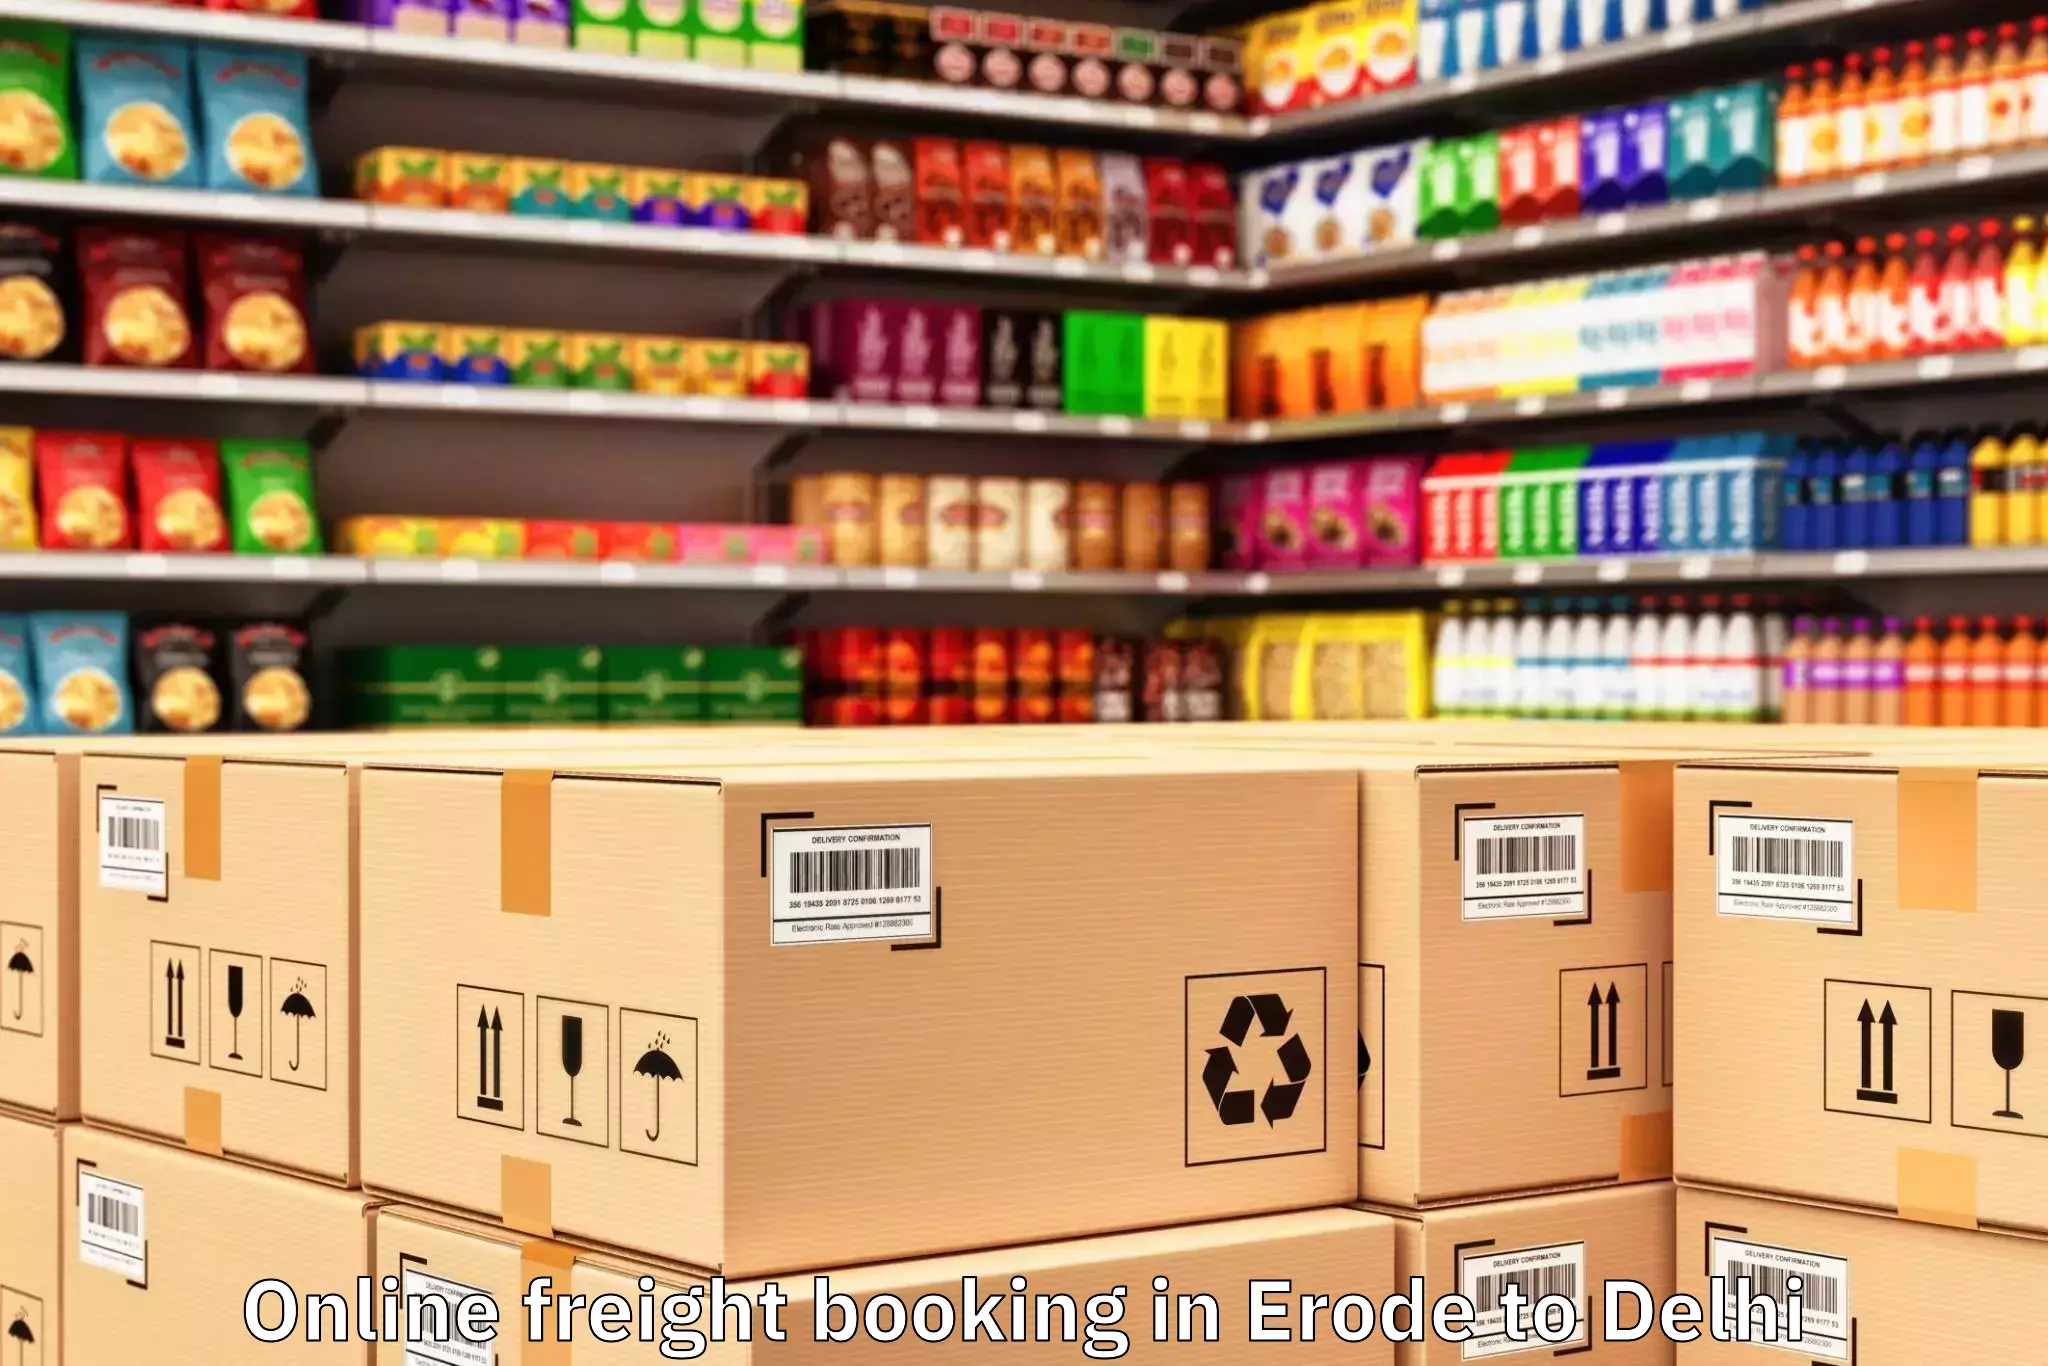 Erode to Functional Industrial Estate For Electronics Online Freight Booking Booking